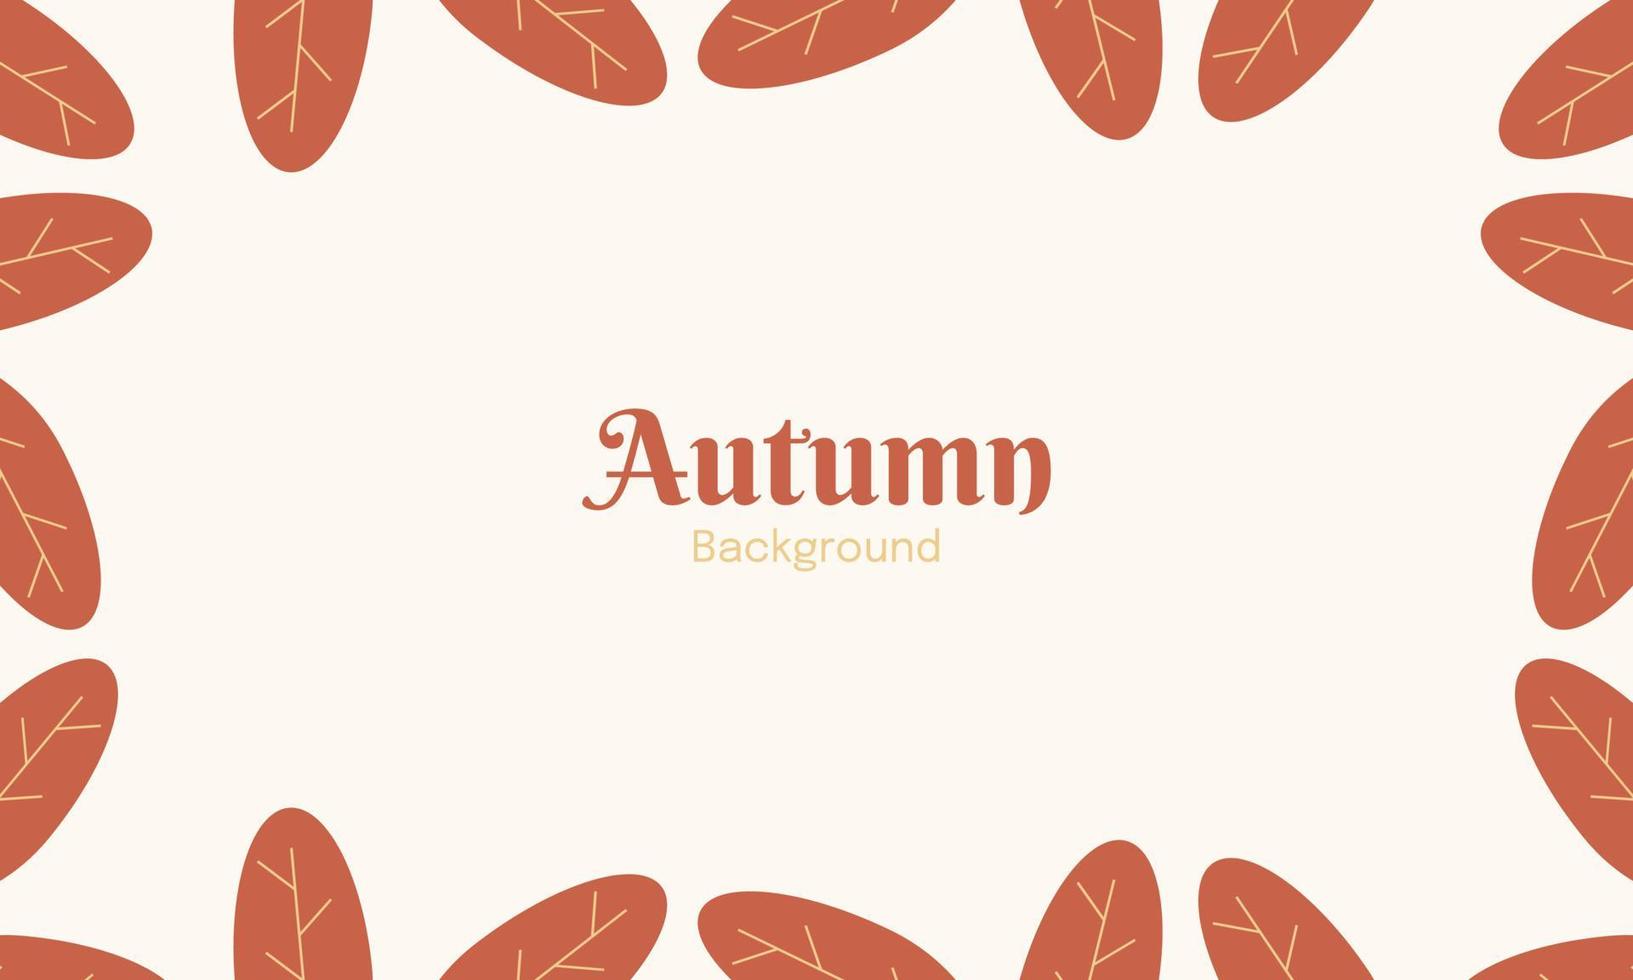 Autumn background with leaves. Fall background with leaves. Autumn background with copy space text vector